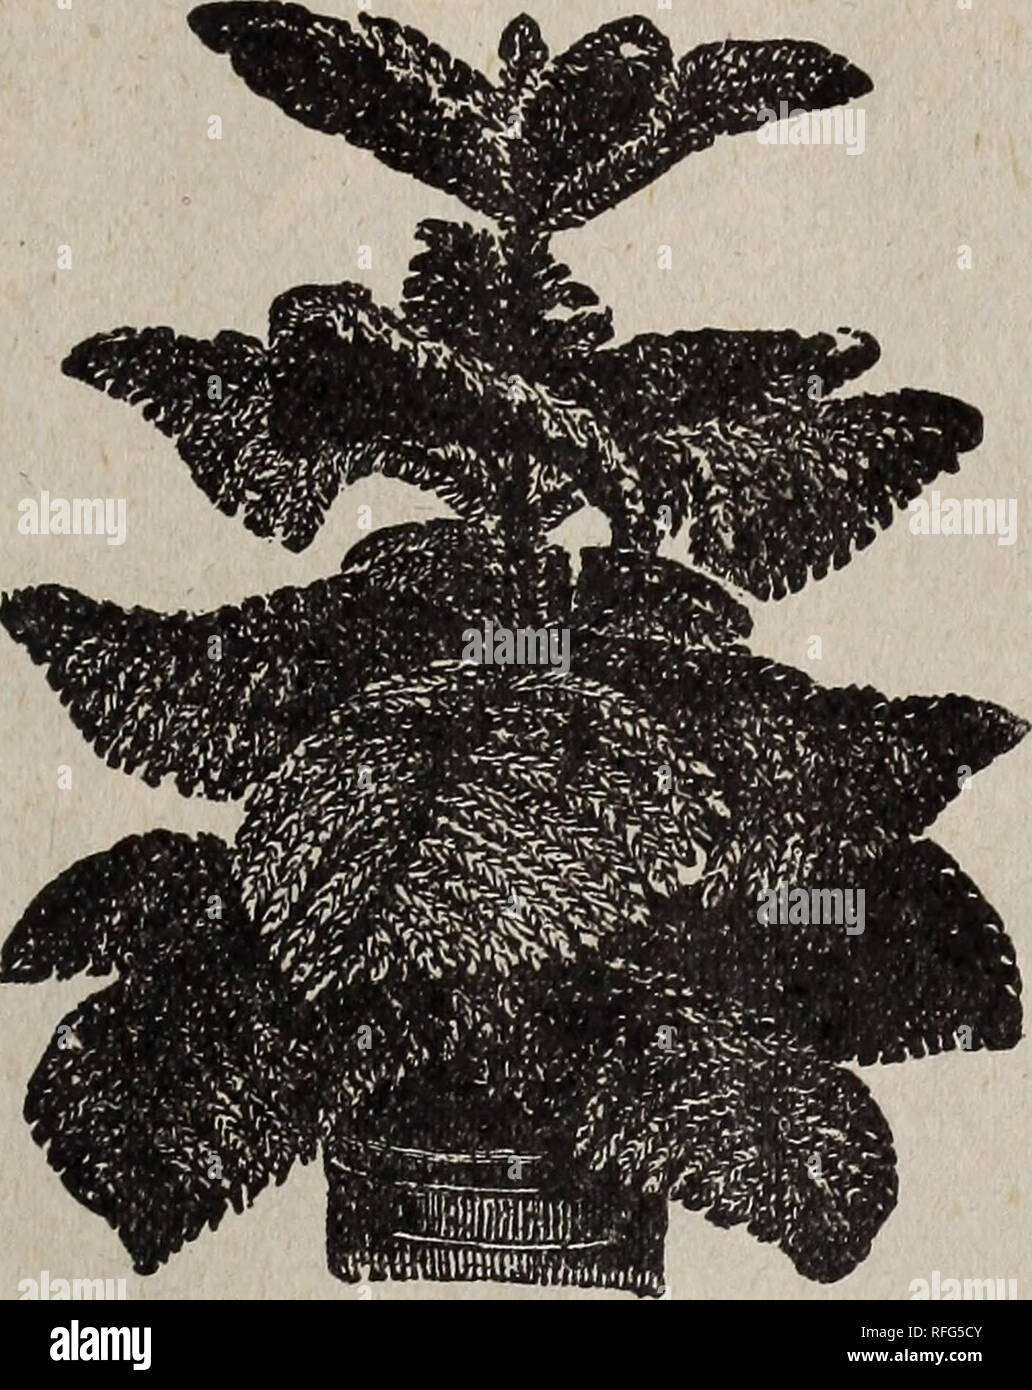 . The Geo. H. Mellen Co. : 1900. Nursery stock Ohio Springfield Catalogs; Bulbs (Plants) Catalogs; Flowers Seeds Catalogs; Plants, Ornamental Catalogs; Fruit Catalogs. Innisfallen Greenhouses, Springfield, Ohio. 65^ A FEW PLANT NOVELTIES i. ARAFCAniA EXCELSA. ARAUCARIA EXCELSA—Norfolk Island Pine. Various names have been selected for this grand plant, but no descriptive name can give any adequate idea of its beauty, It has deep green, feathery foliage, arranged in whorls, rising one above the other at regular distances; its symmetrv of form, grace and beauty of foliage are un- equaled in the v Stock Photo